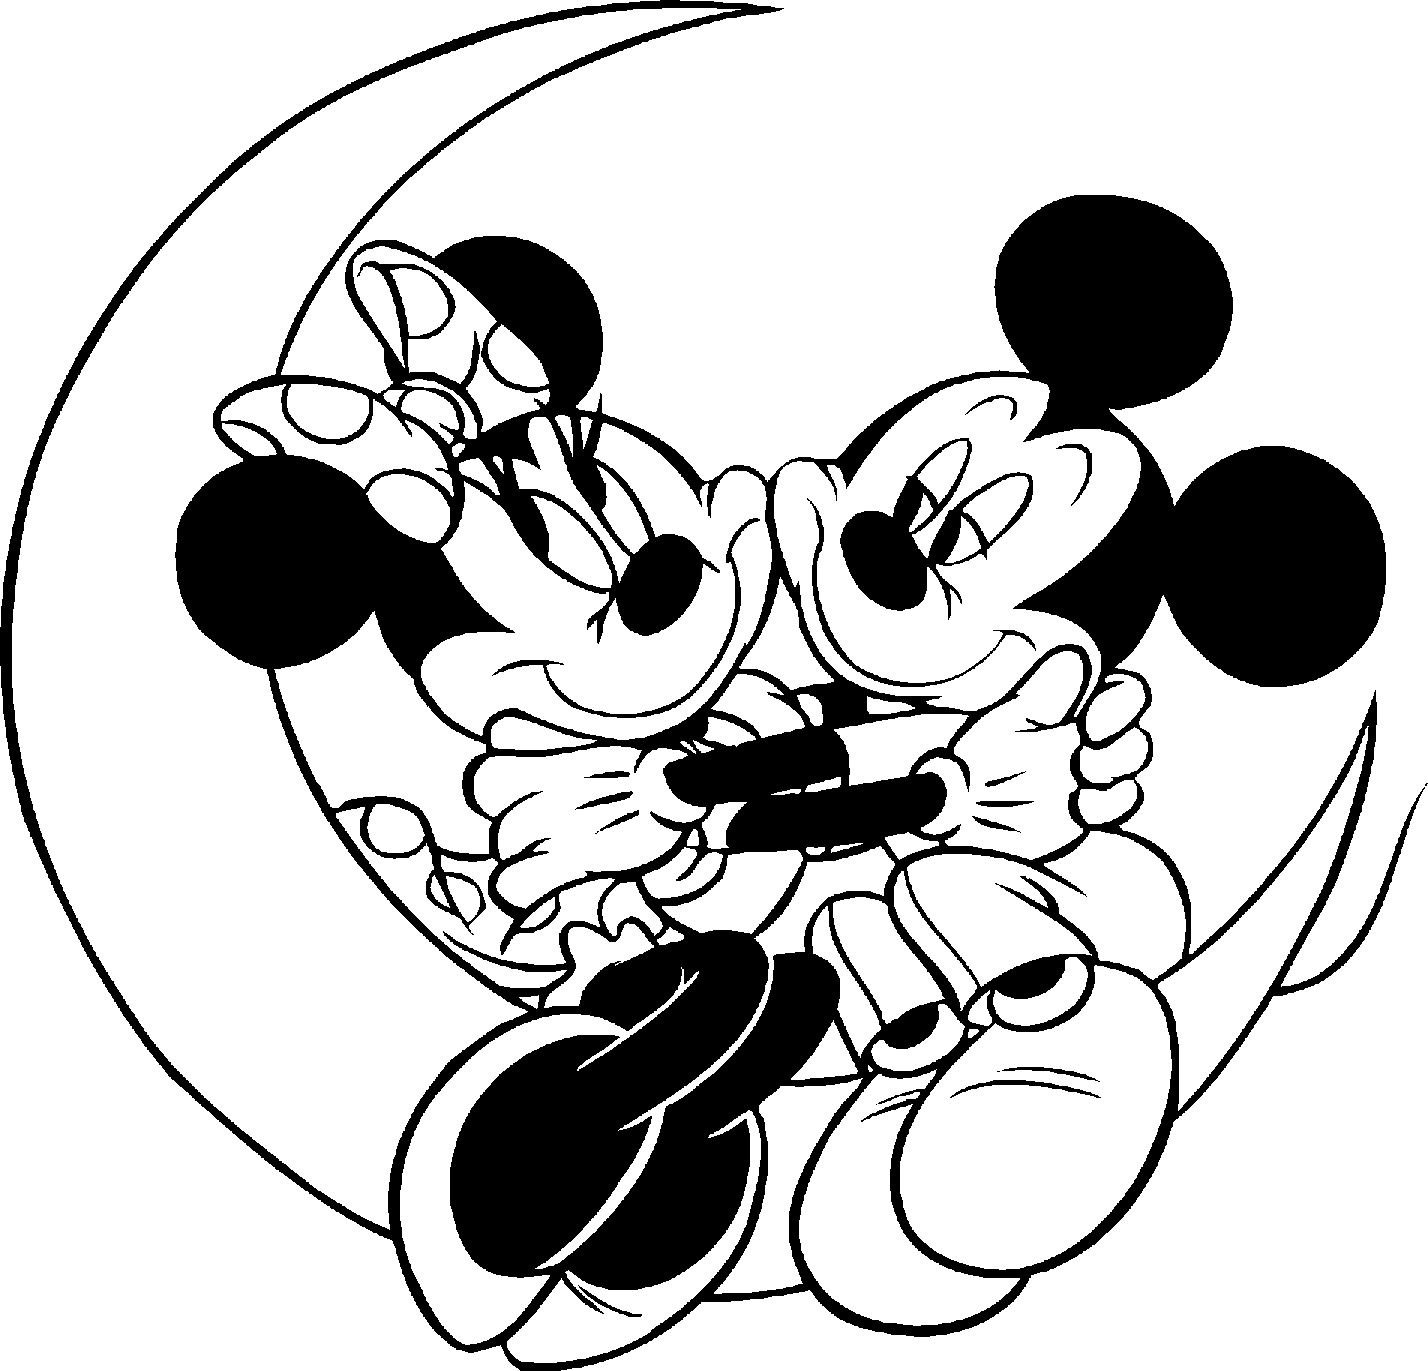 Mickey Mouse and Minnie Mouse Kissing  Disney Coloring 